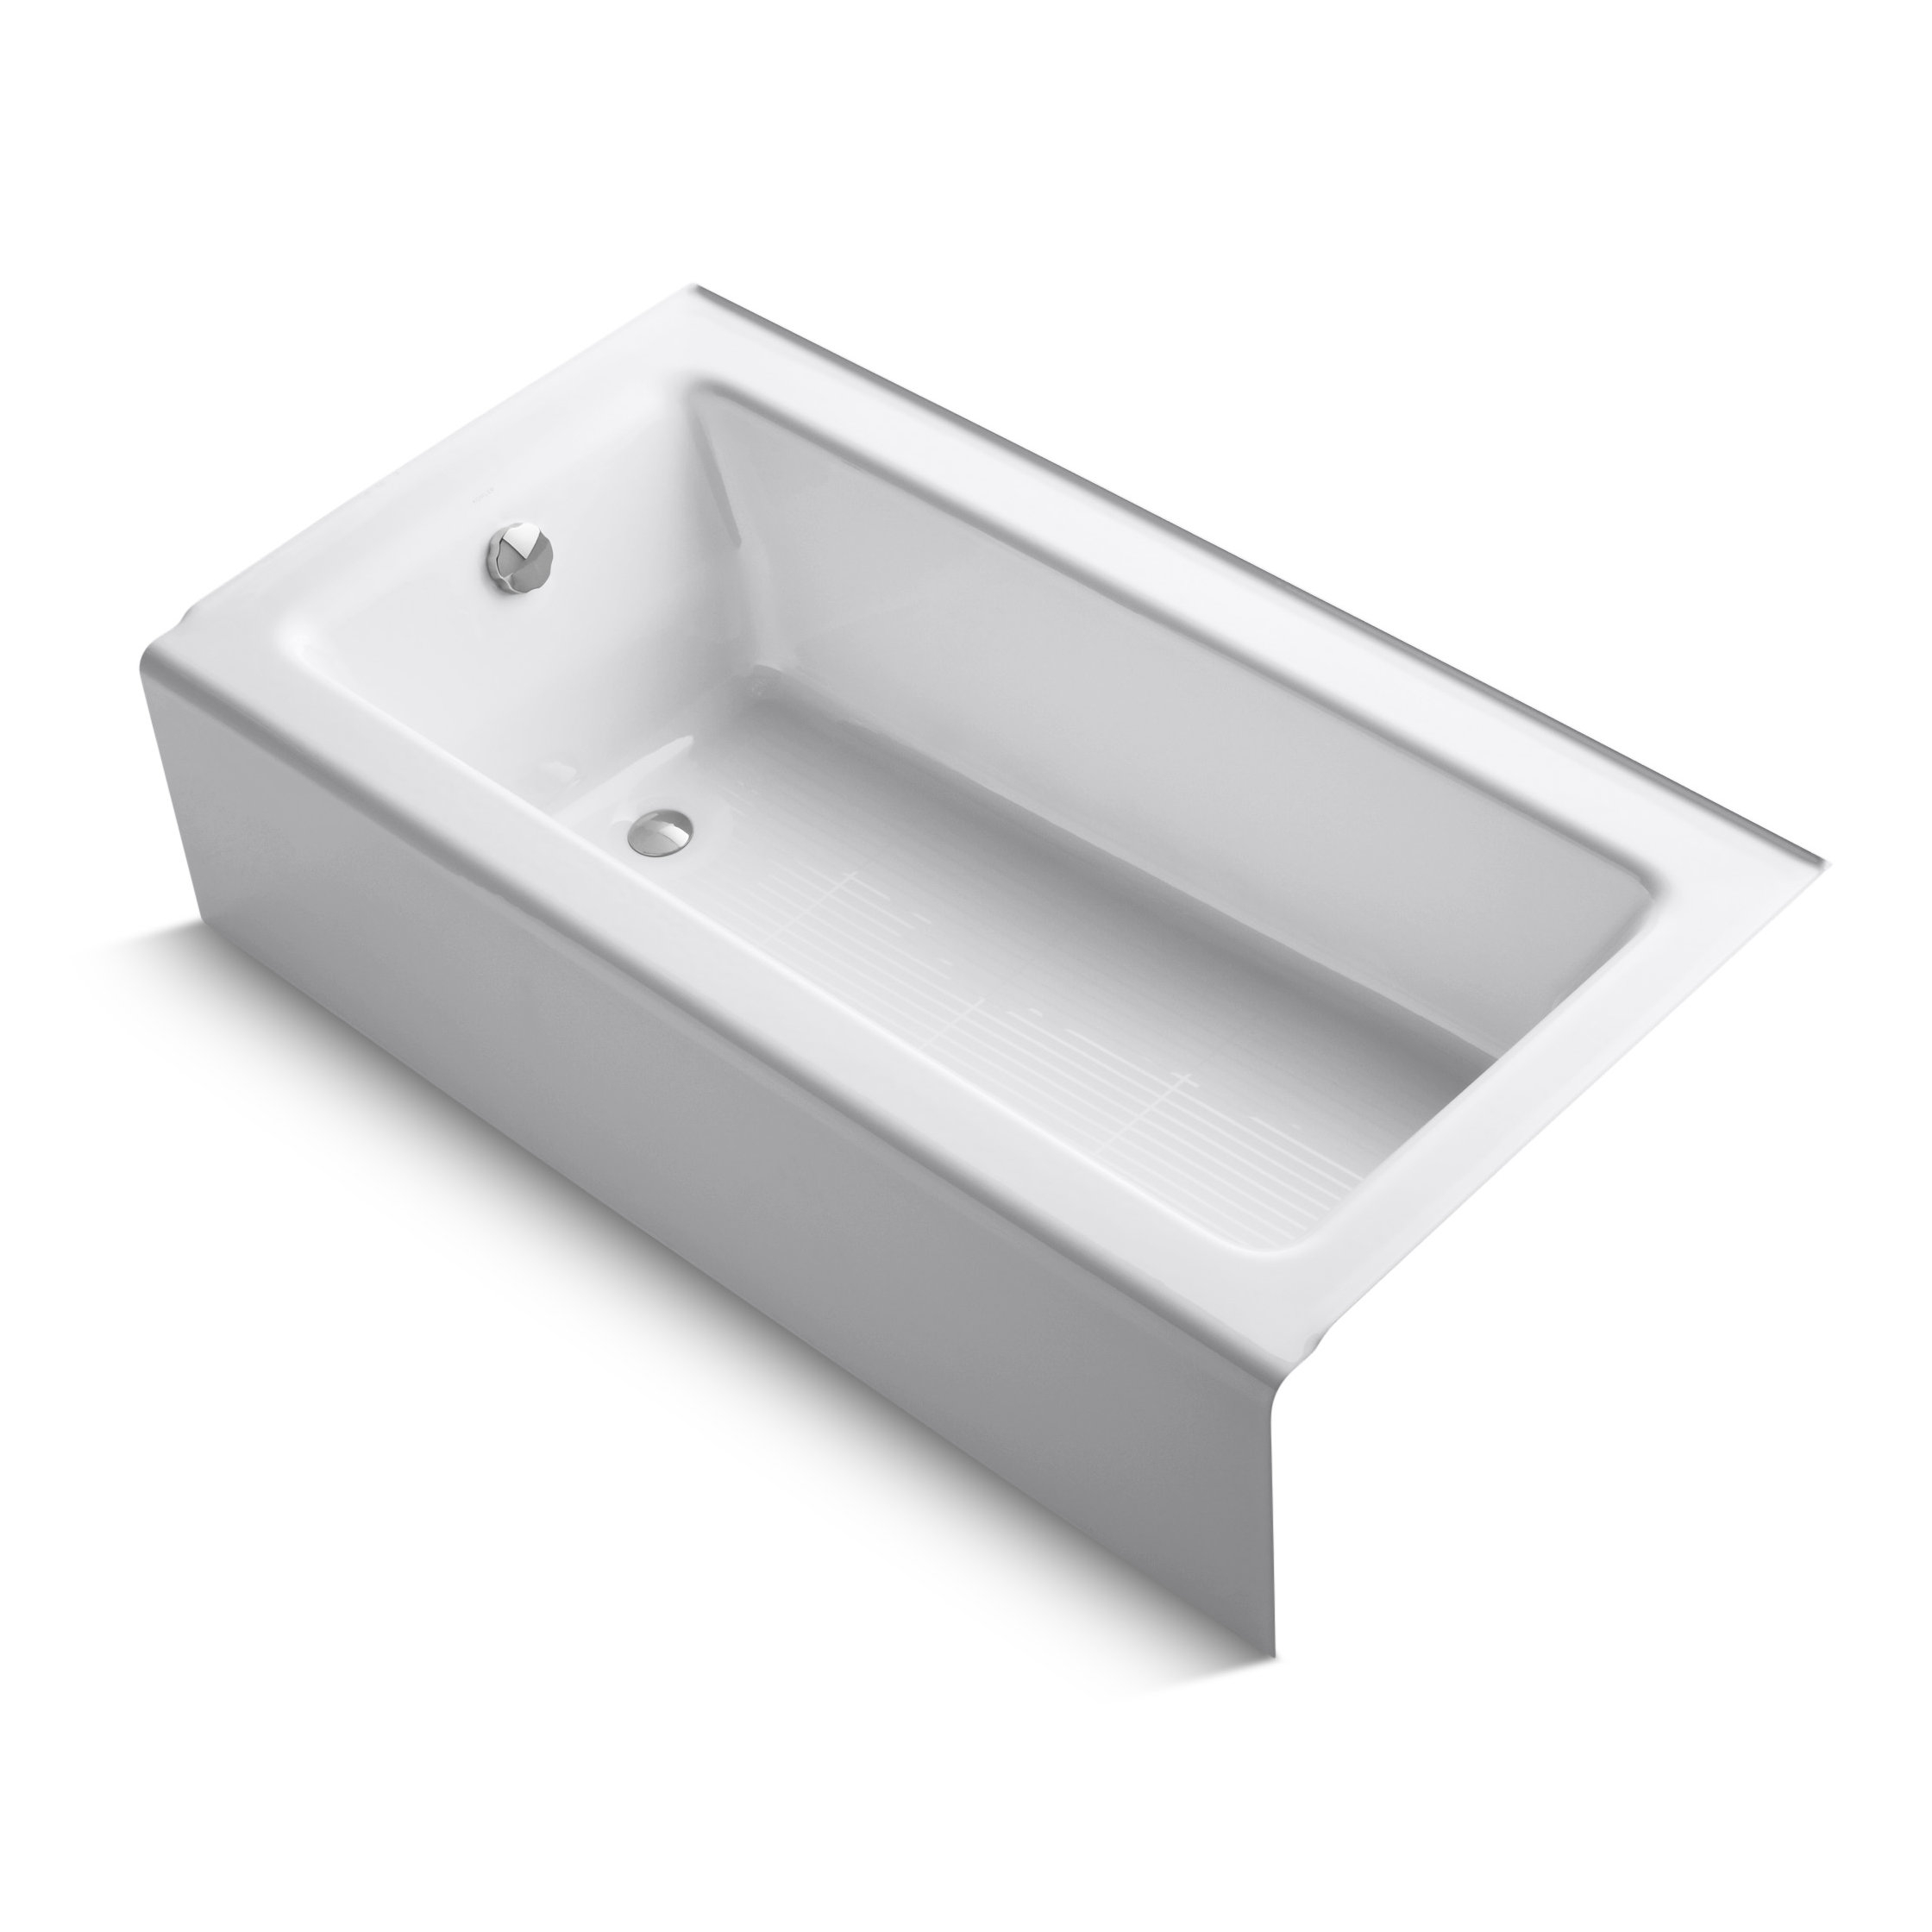 Bellwether Alcove 60 X 32 Soaking Bathtub Reviews Allmodern intended for measurements 2240 X 2240